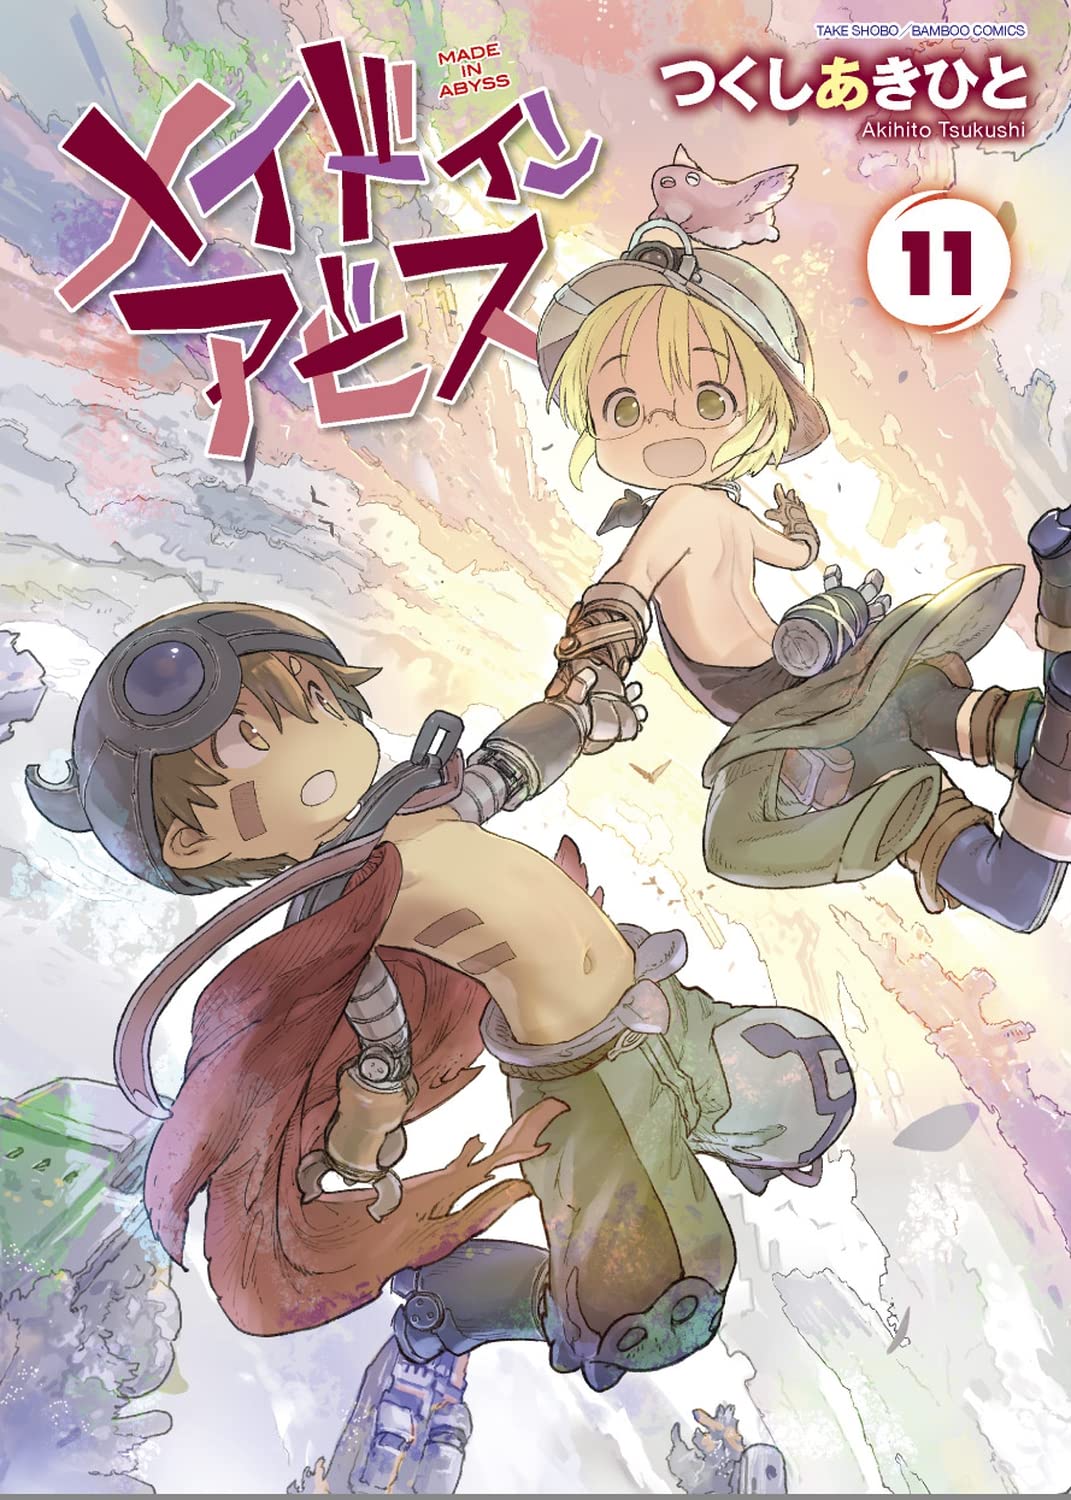 MADE IN ABYSS 11.jpg